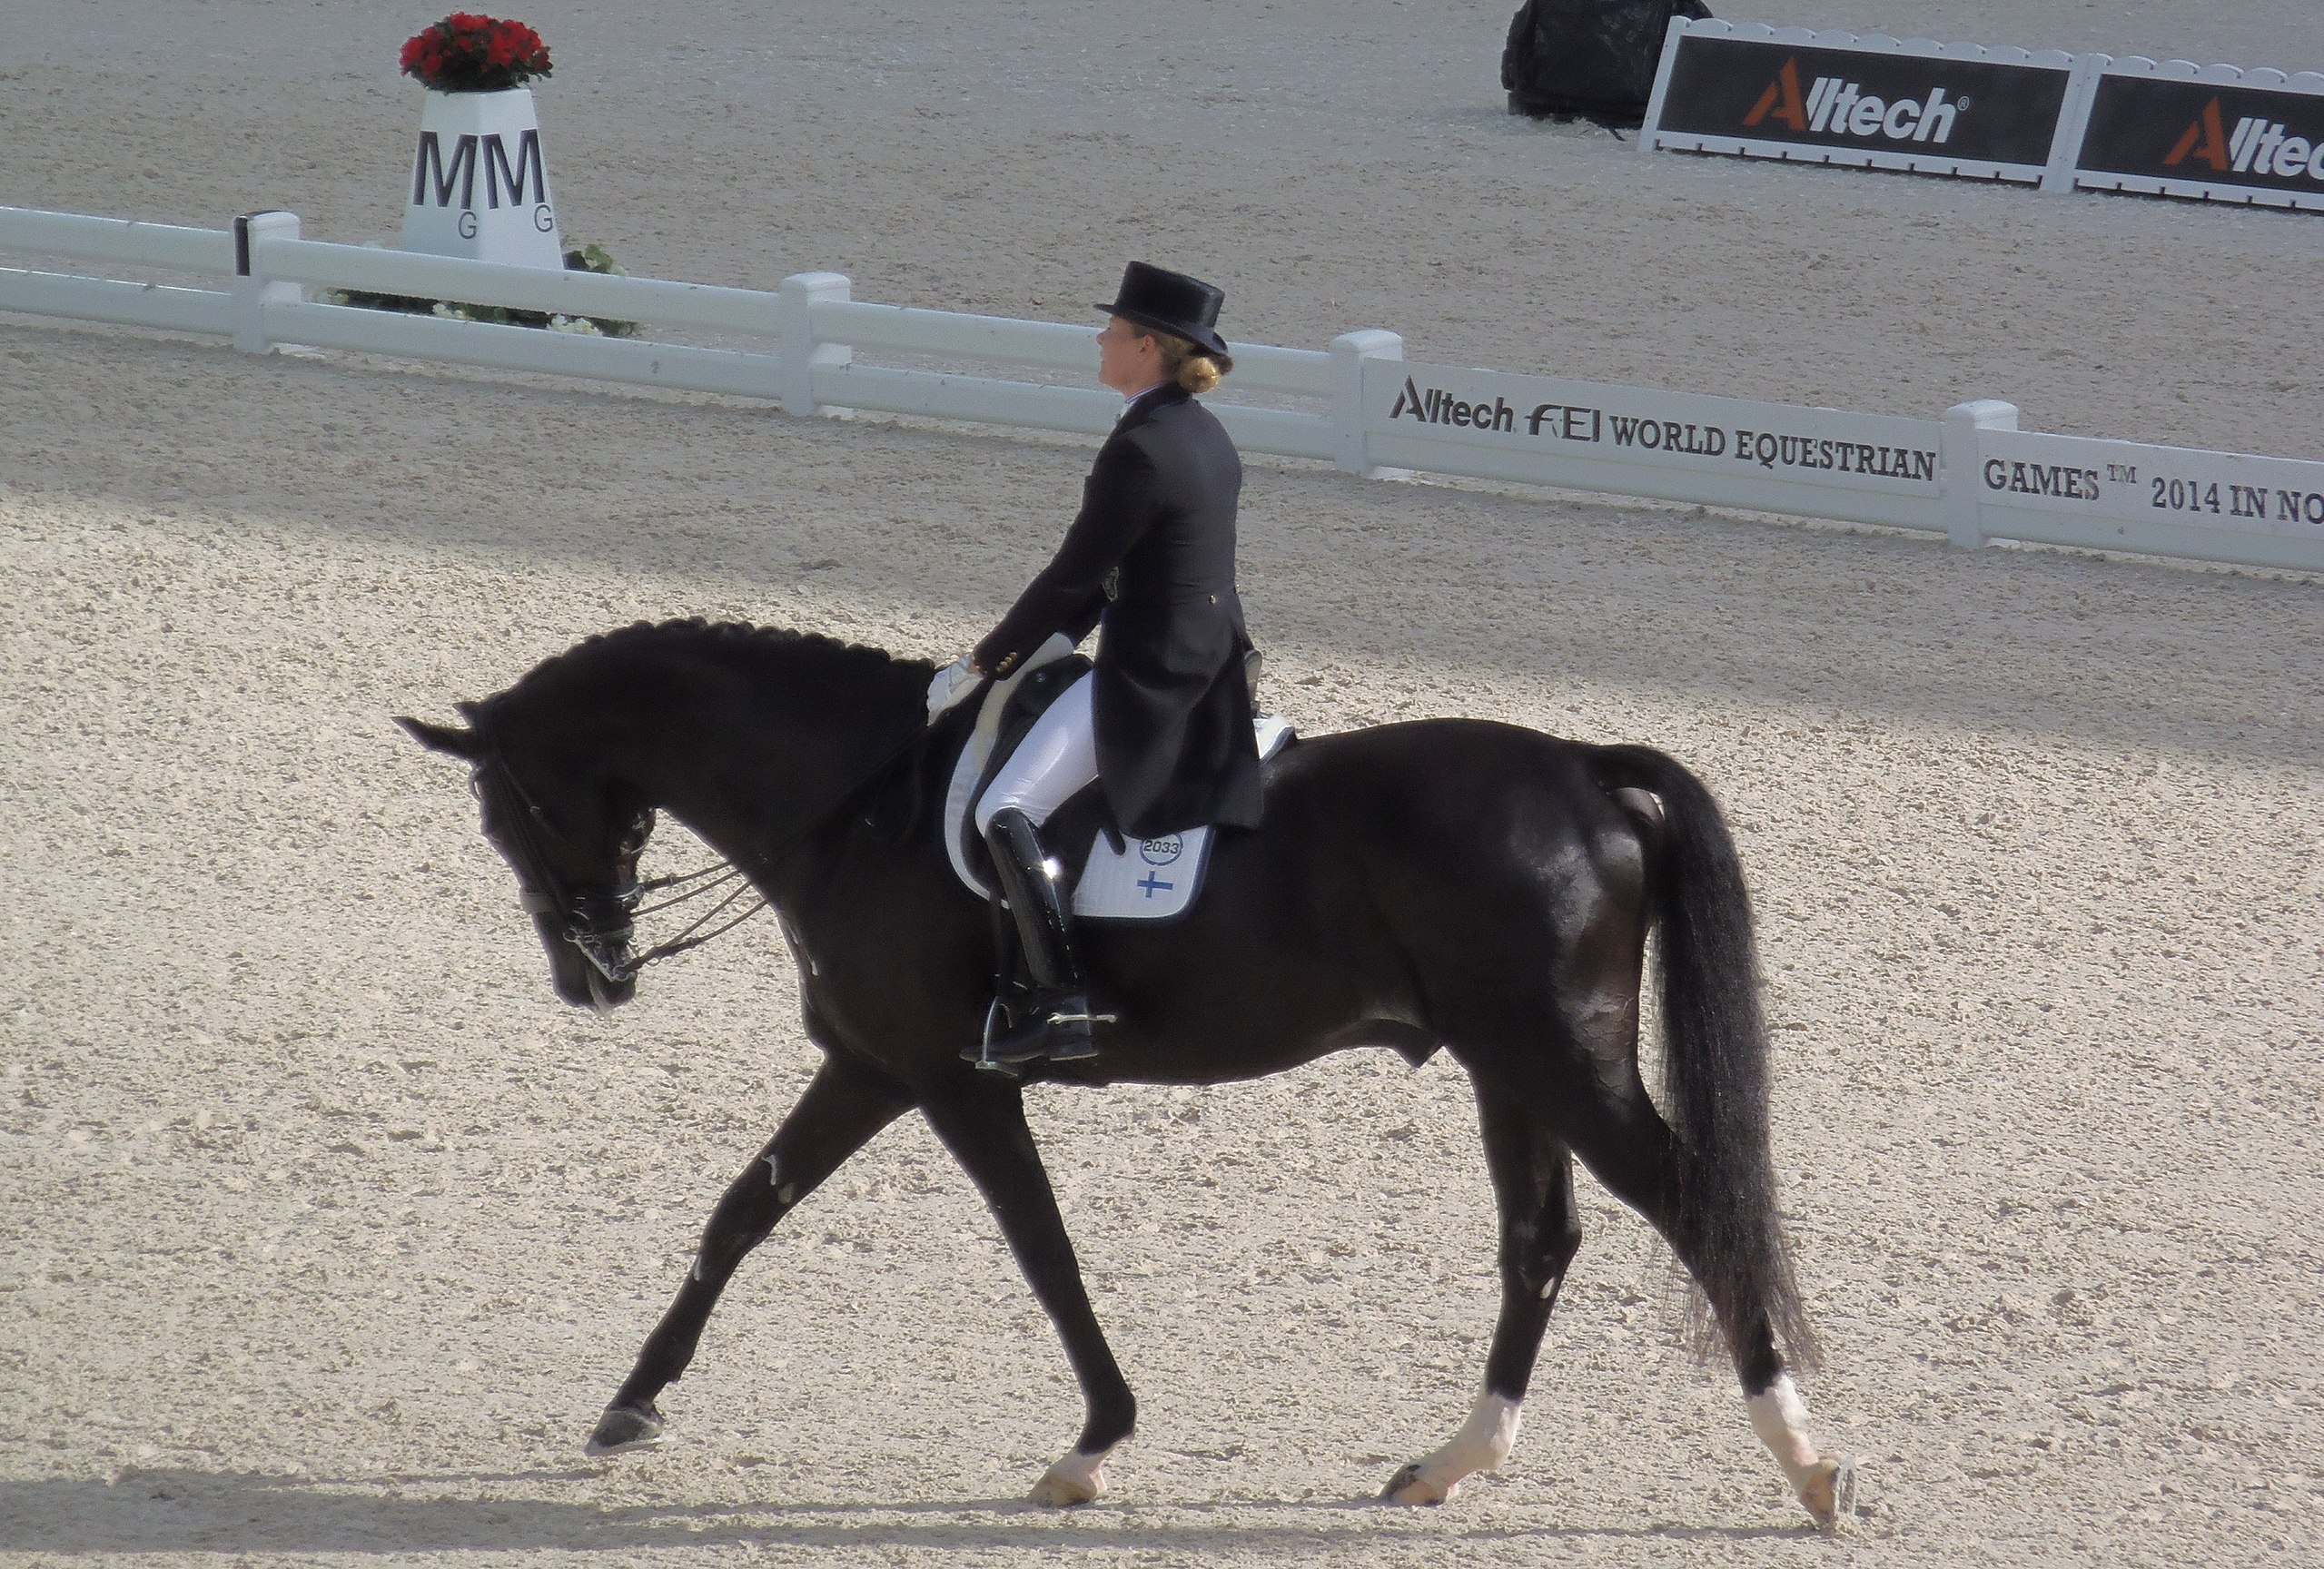 Olympic dressage rider Mikaele Fabricius-Bjerre lost her battle against cancer